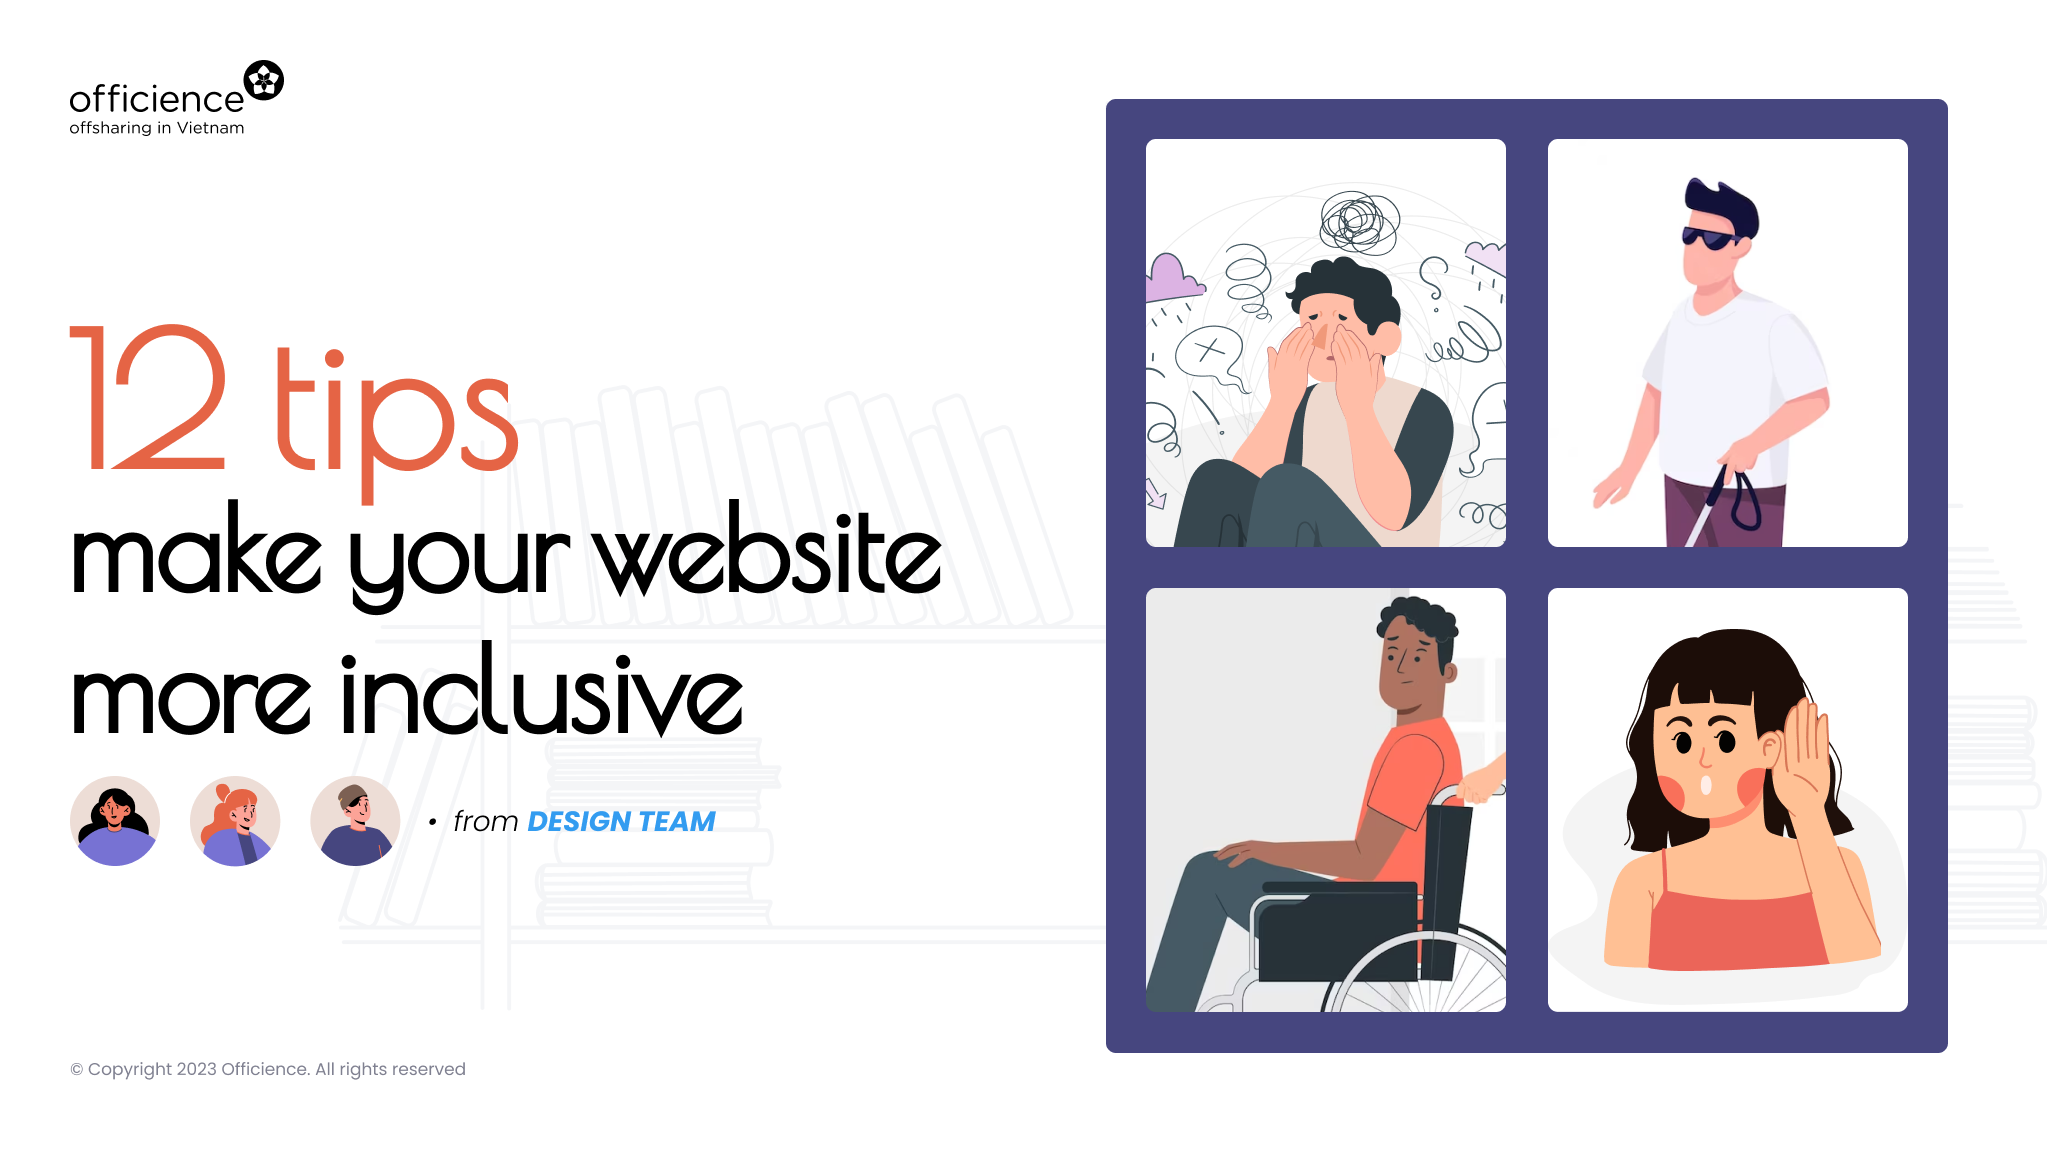 12 tips to make your website more inclusive